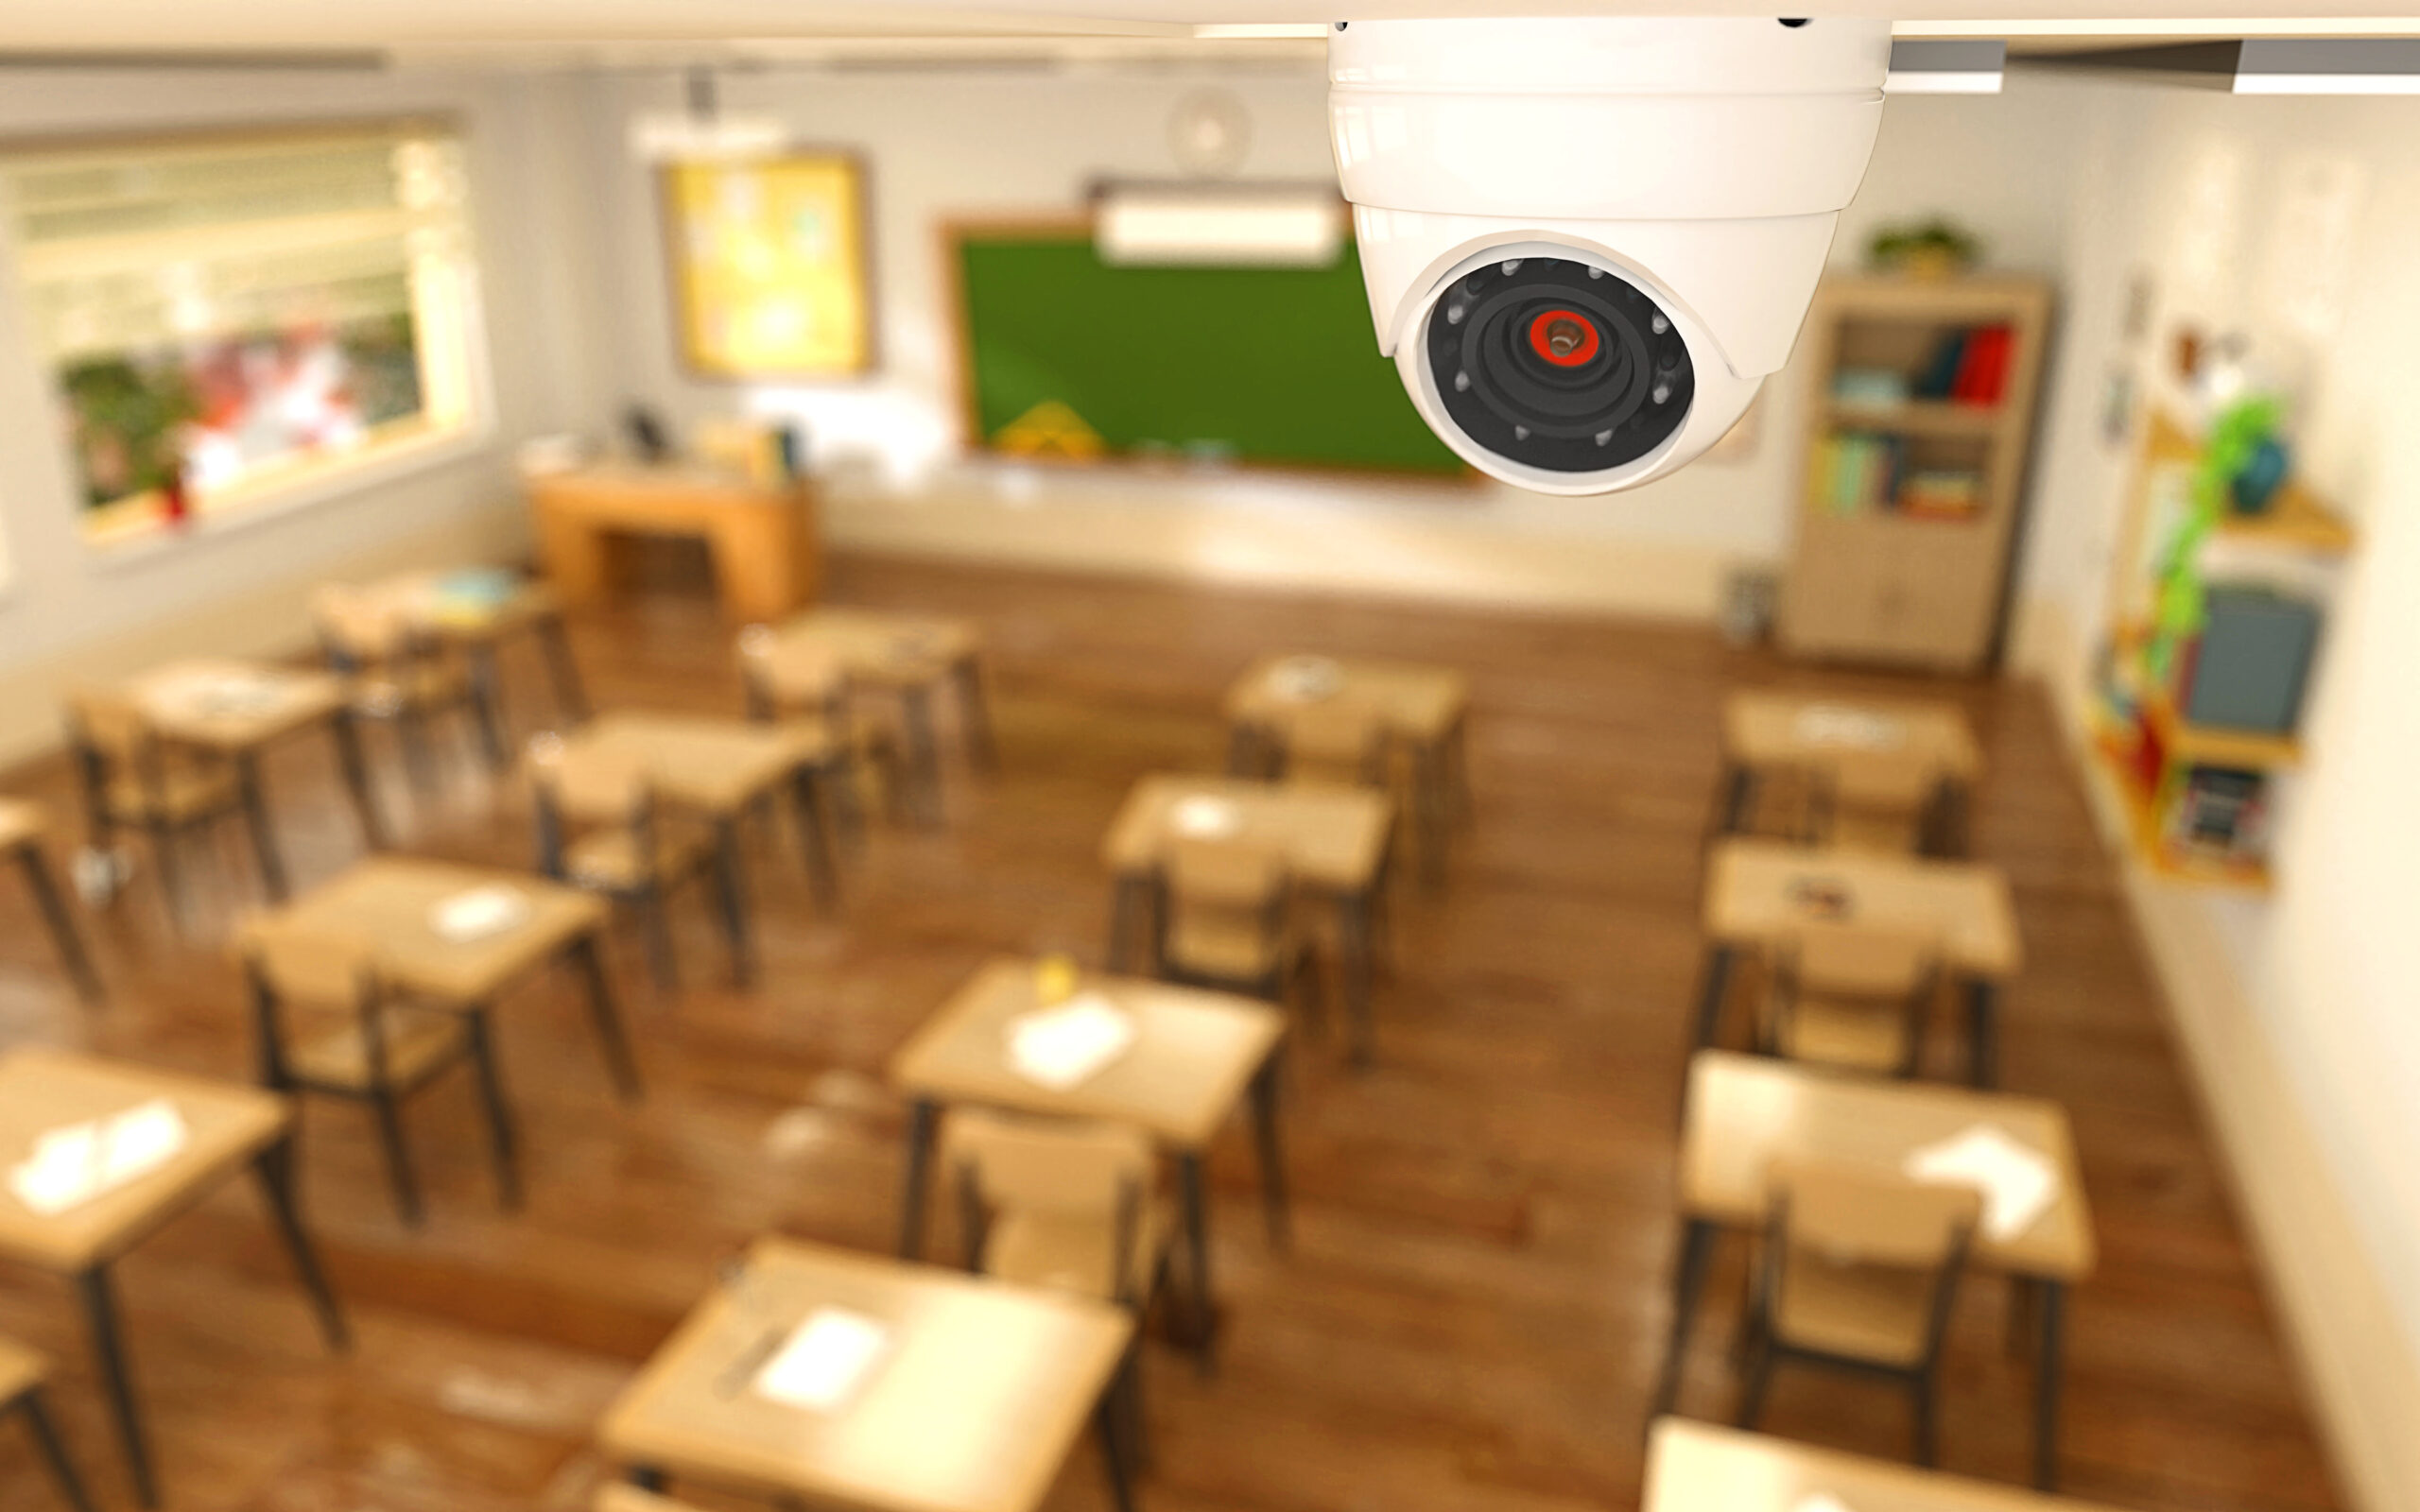 rendering of a small camera on the ceiling of an empty classroom